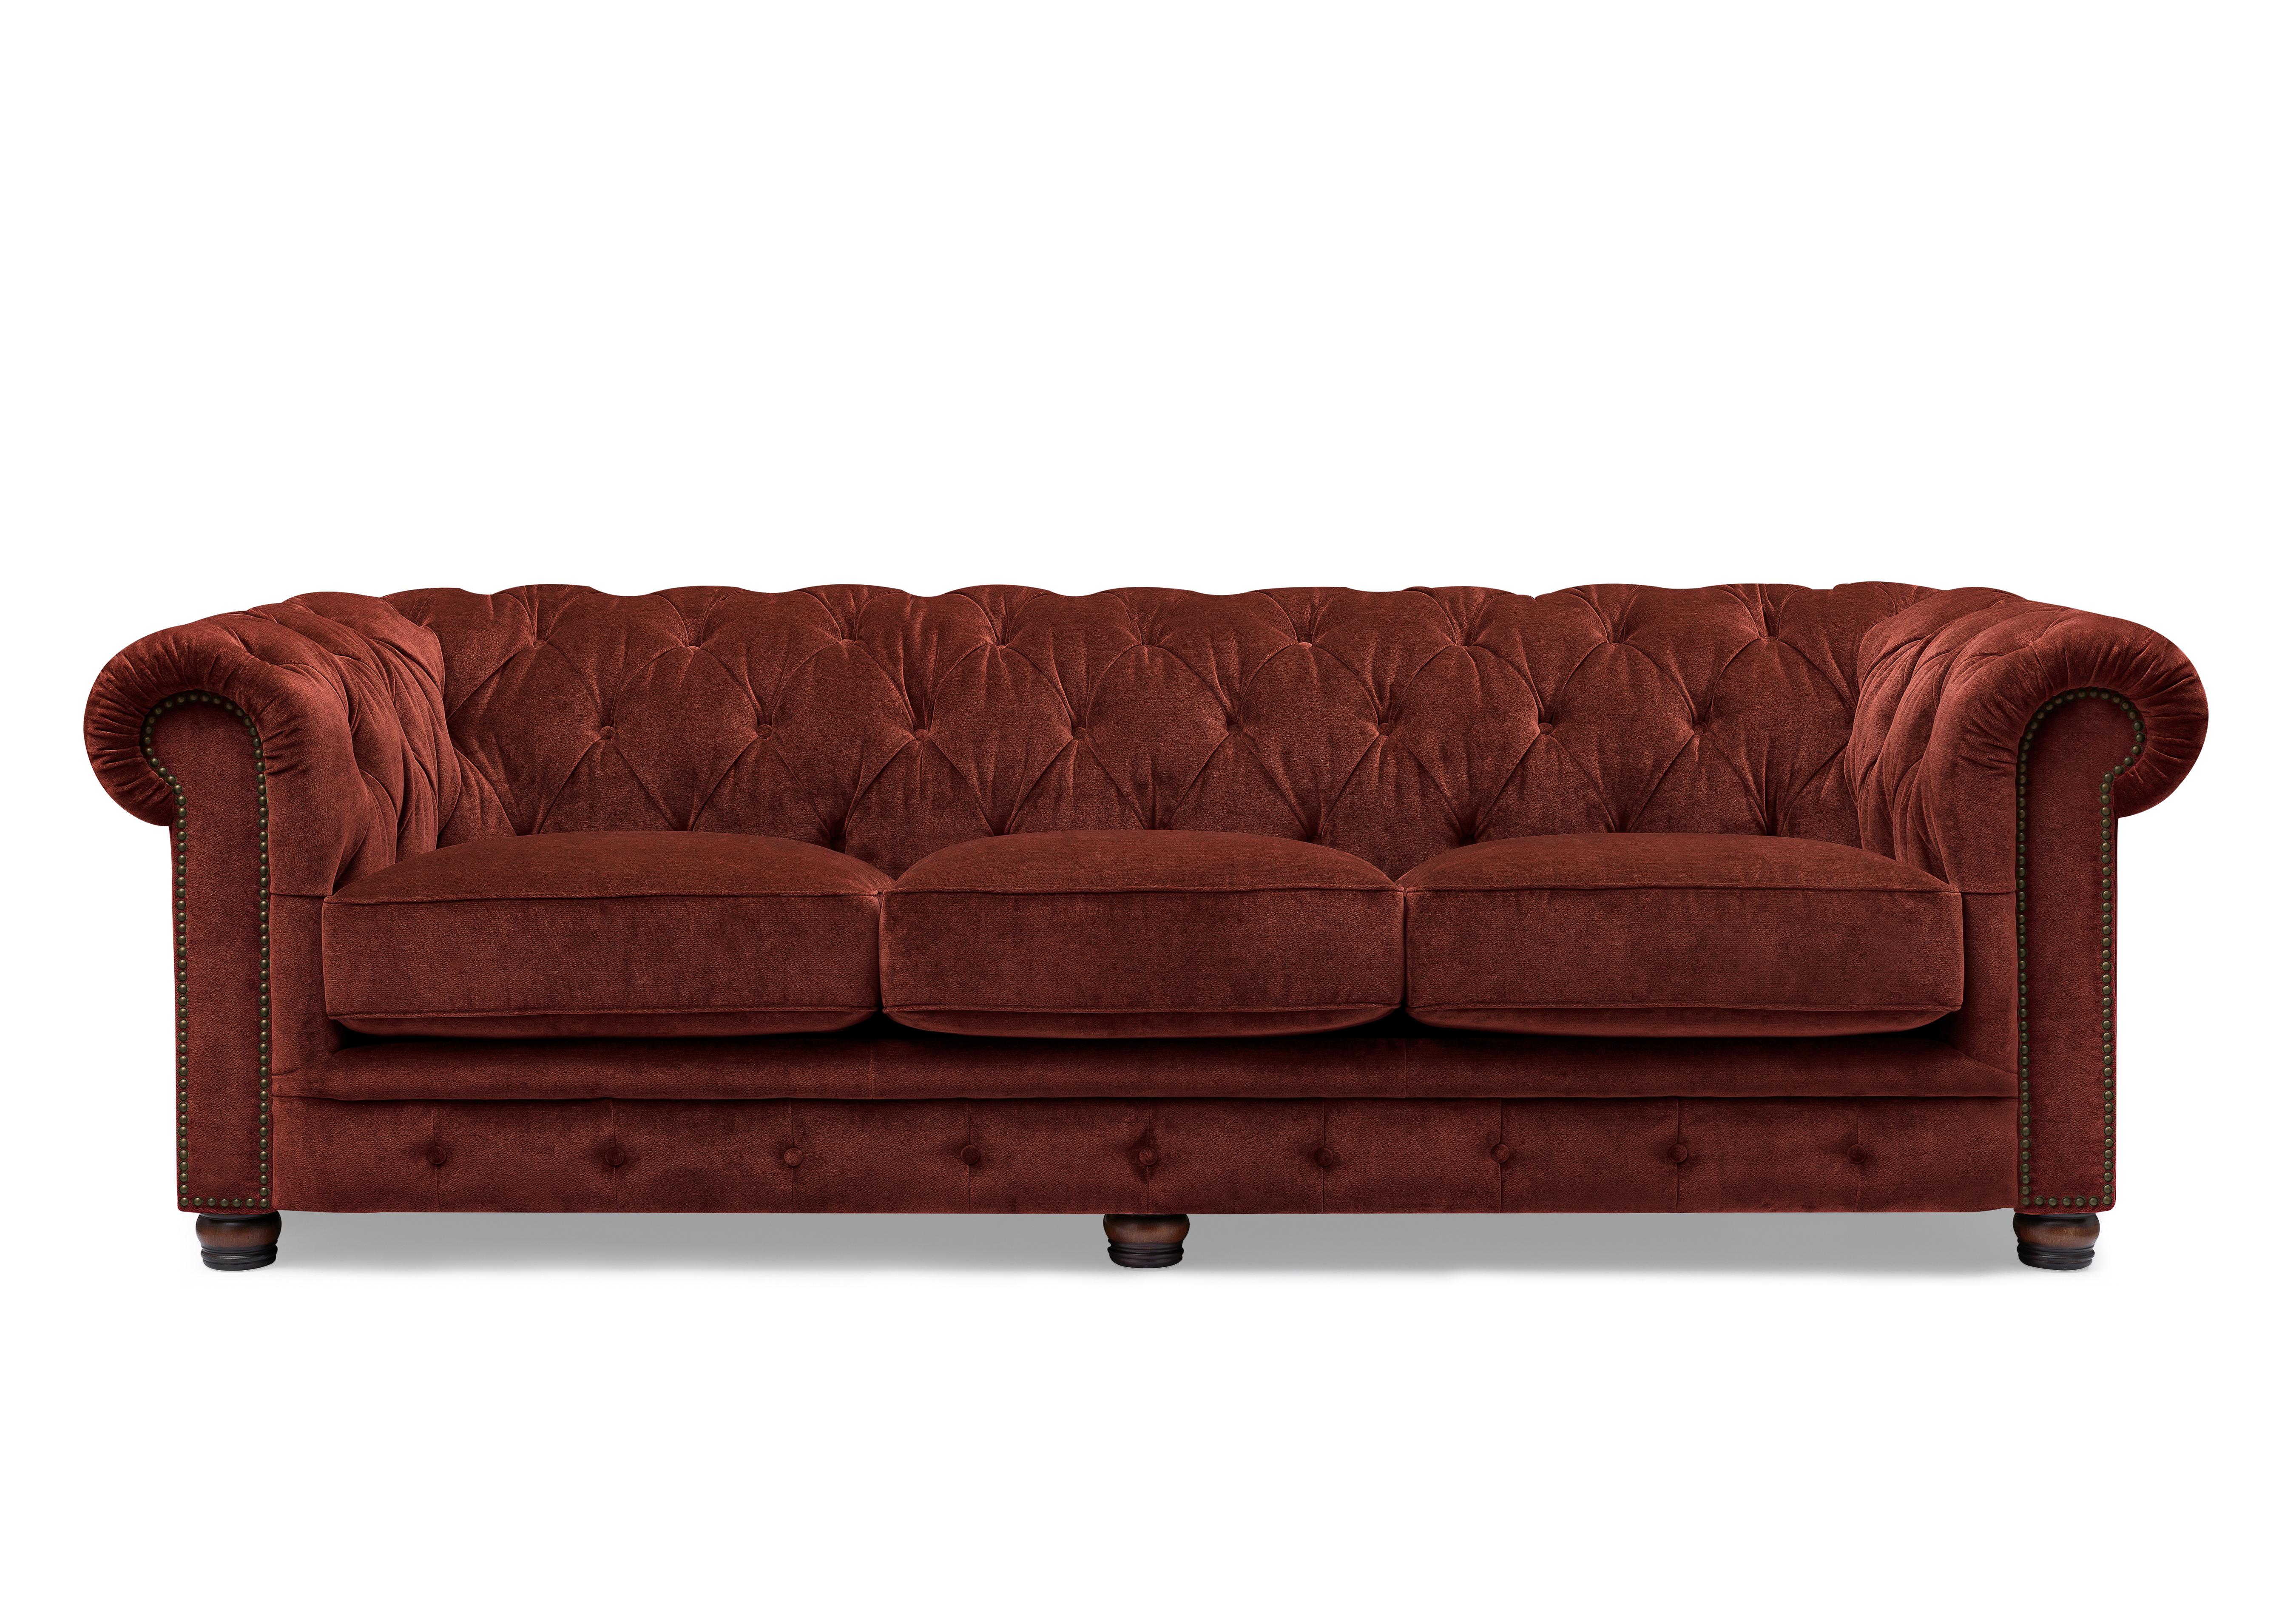 Shackleton 4 Seater Fabric Chesterfield Sofa with USB-C in X3y1-W019 Tawny on Furniture Village